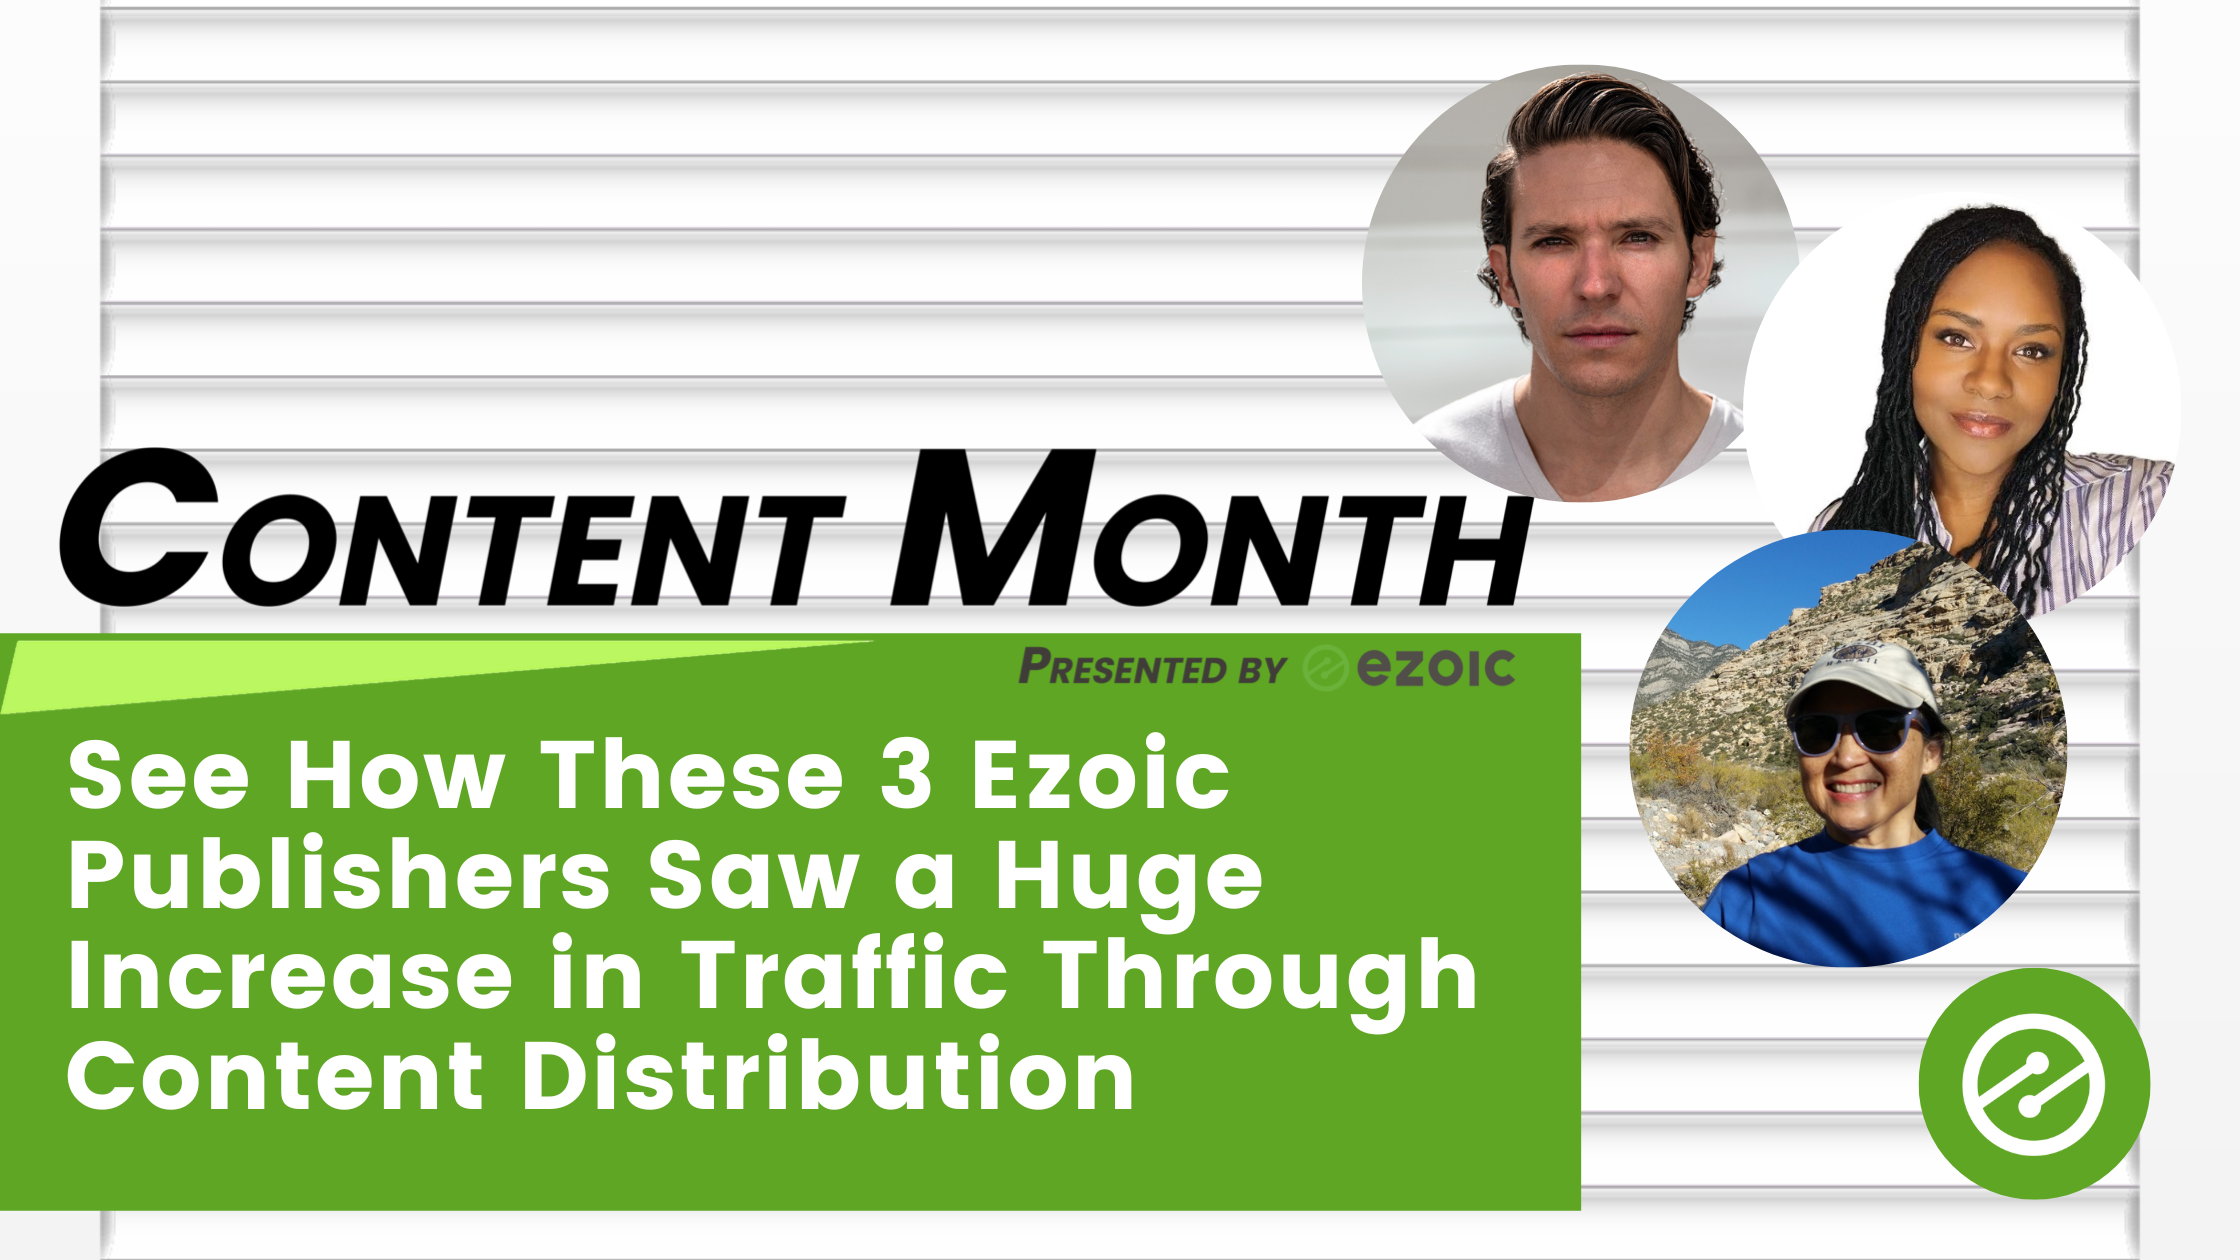 See How These 3 Ezoic Publishers Saw a Huge Increase in Traffic Through Content Distribution&nbsp;